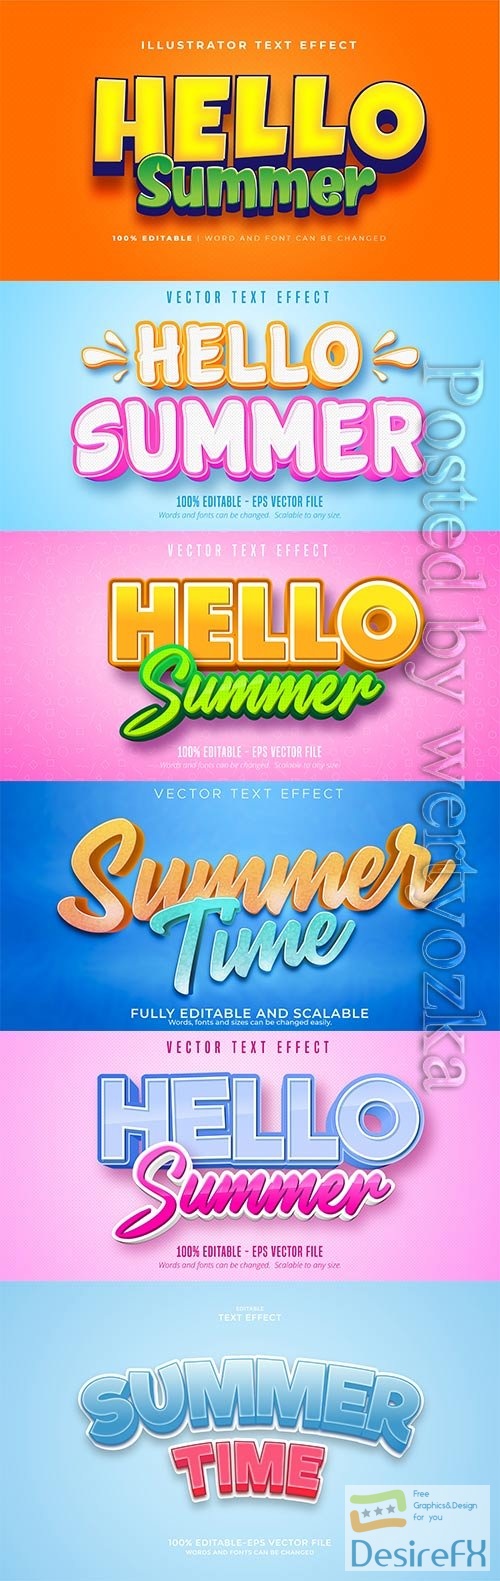 Hello summer text, comic style editable text effect